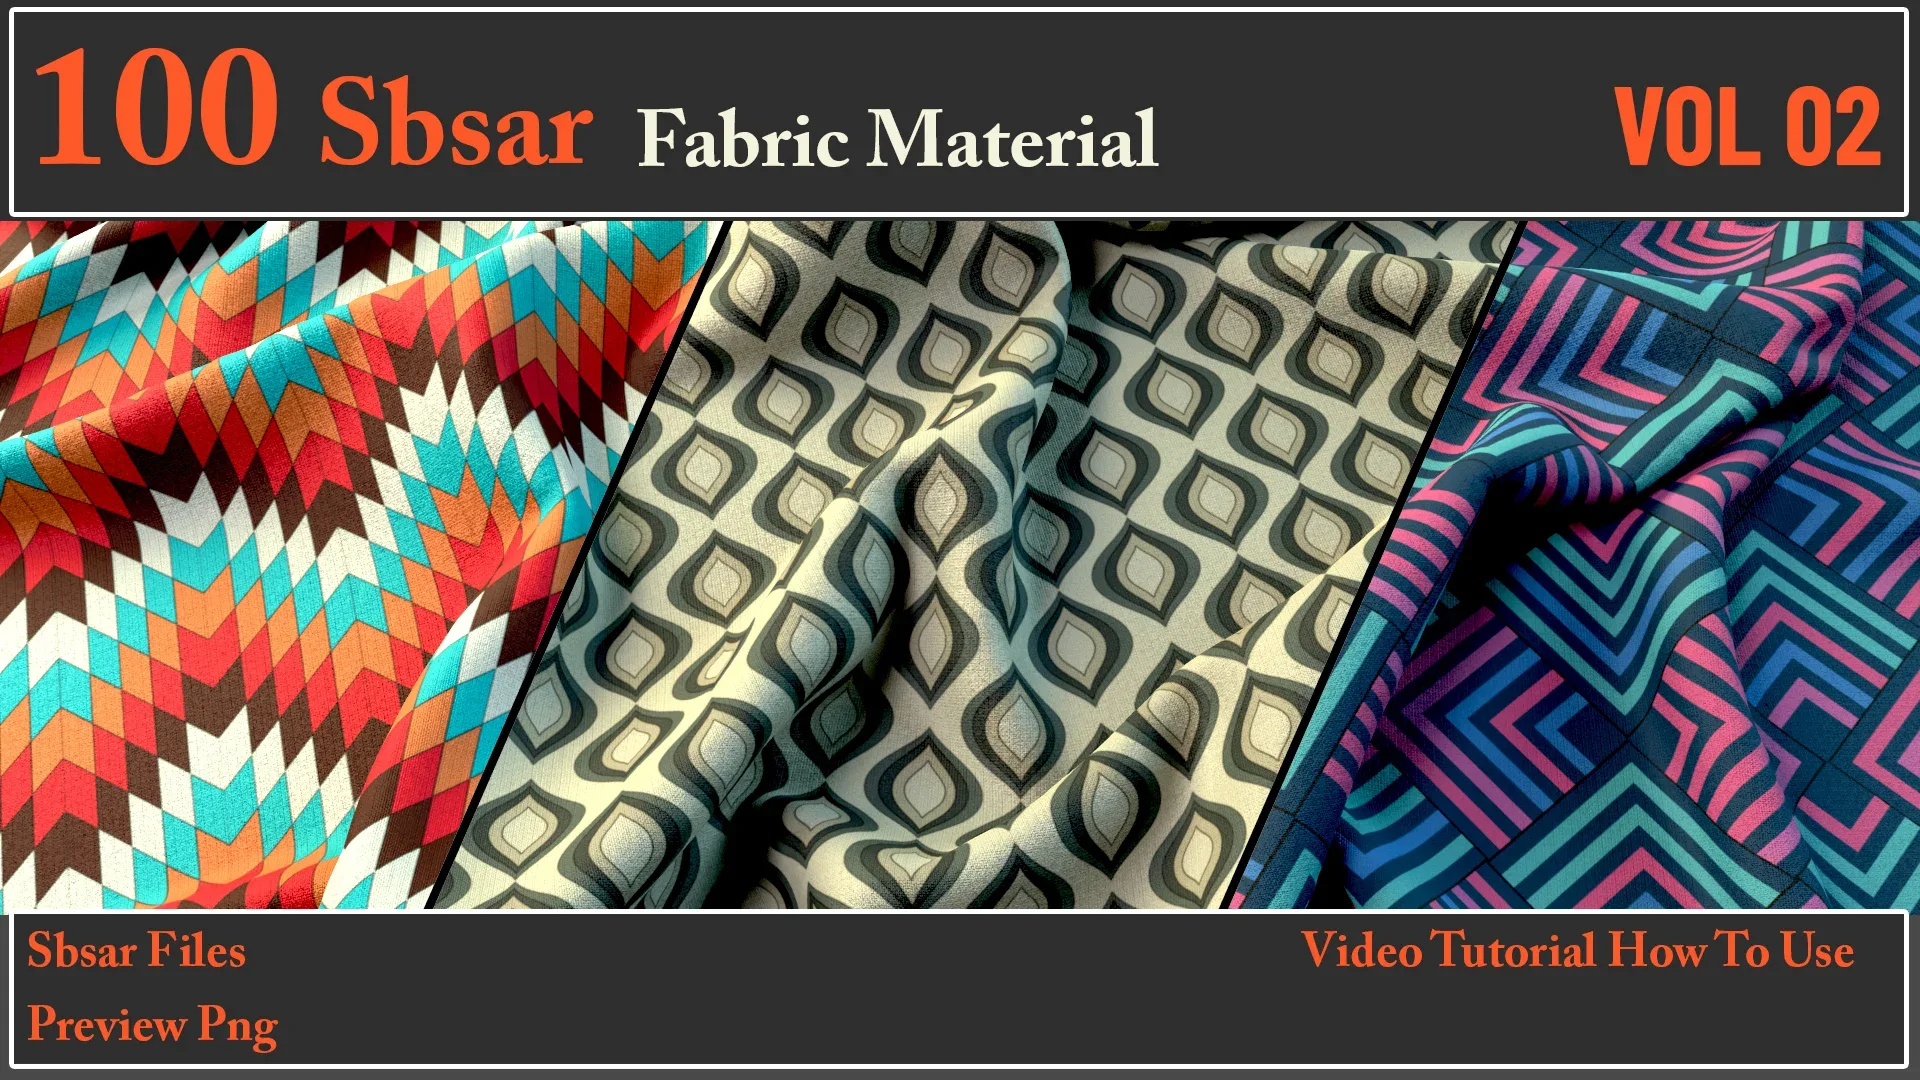 100 SBSAR Files Fabric Materials VOL 02 + Video How To Use